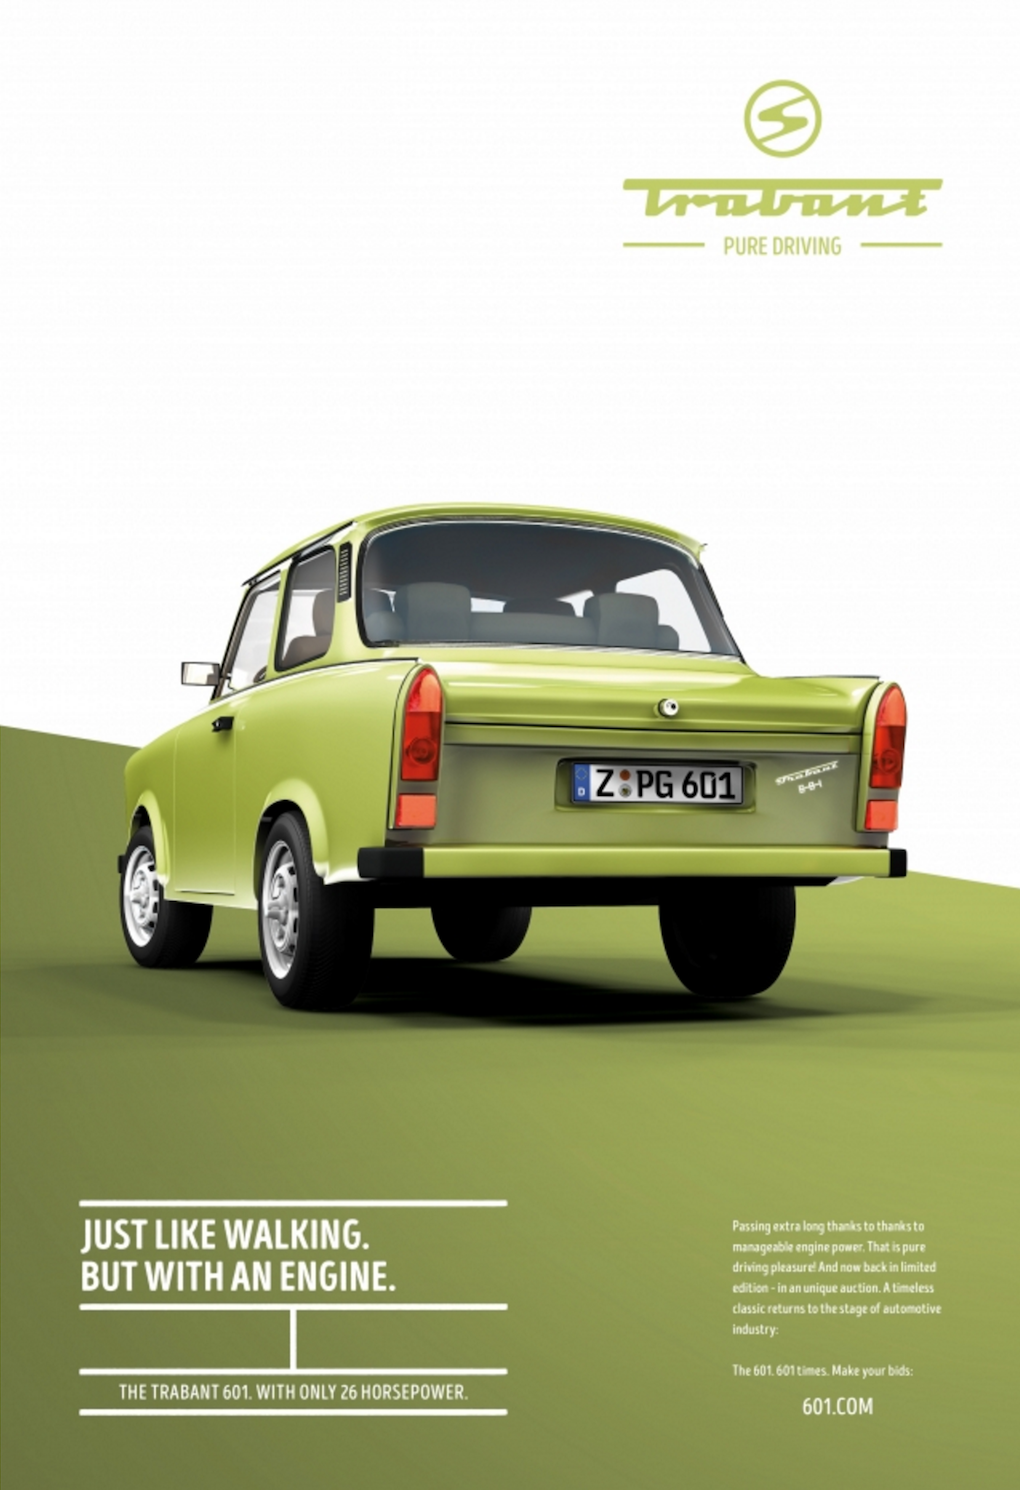 Traban_601_Pure Driving Posters_cubagallery